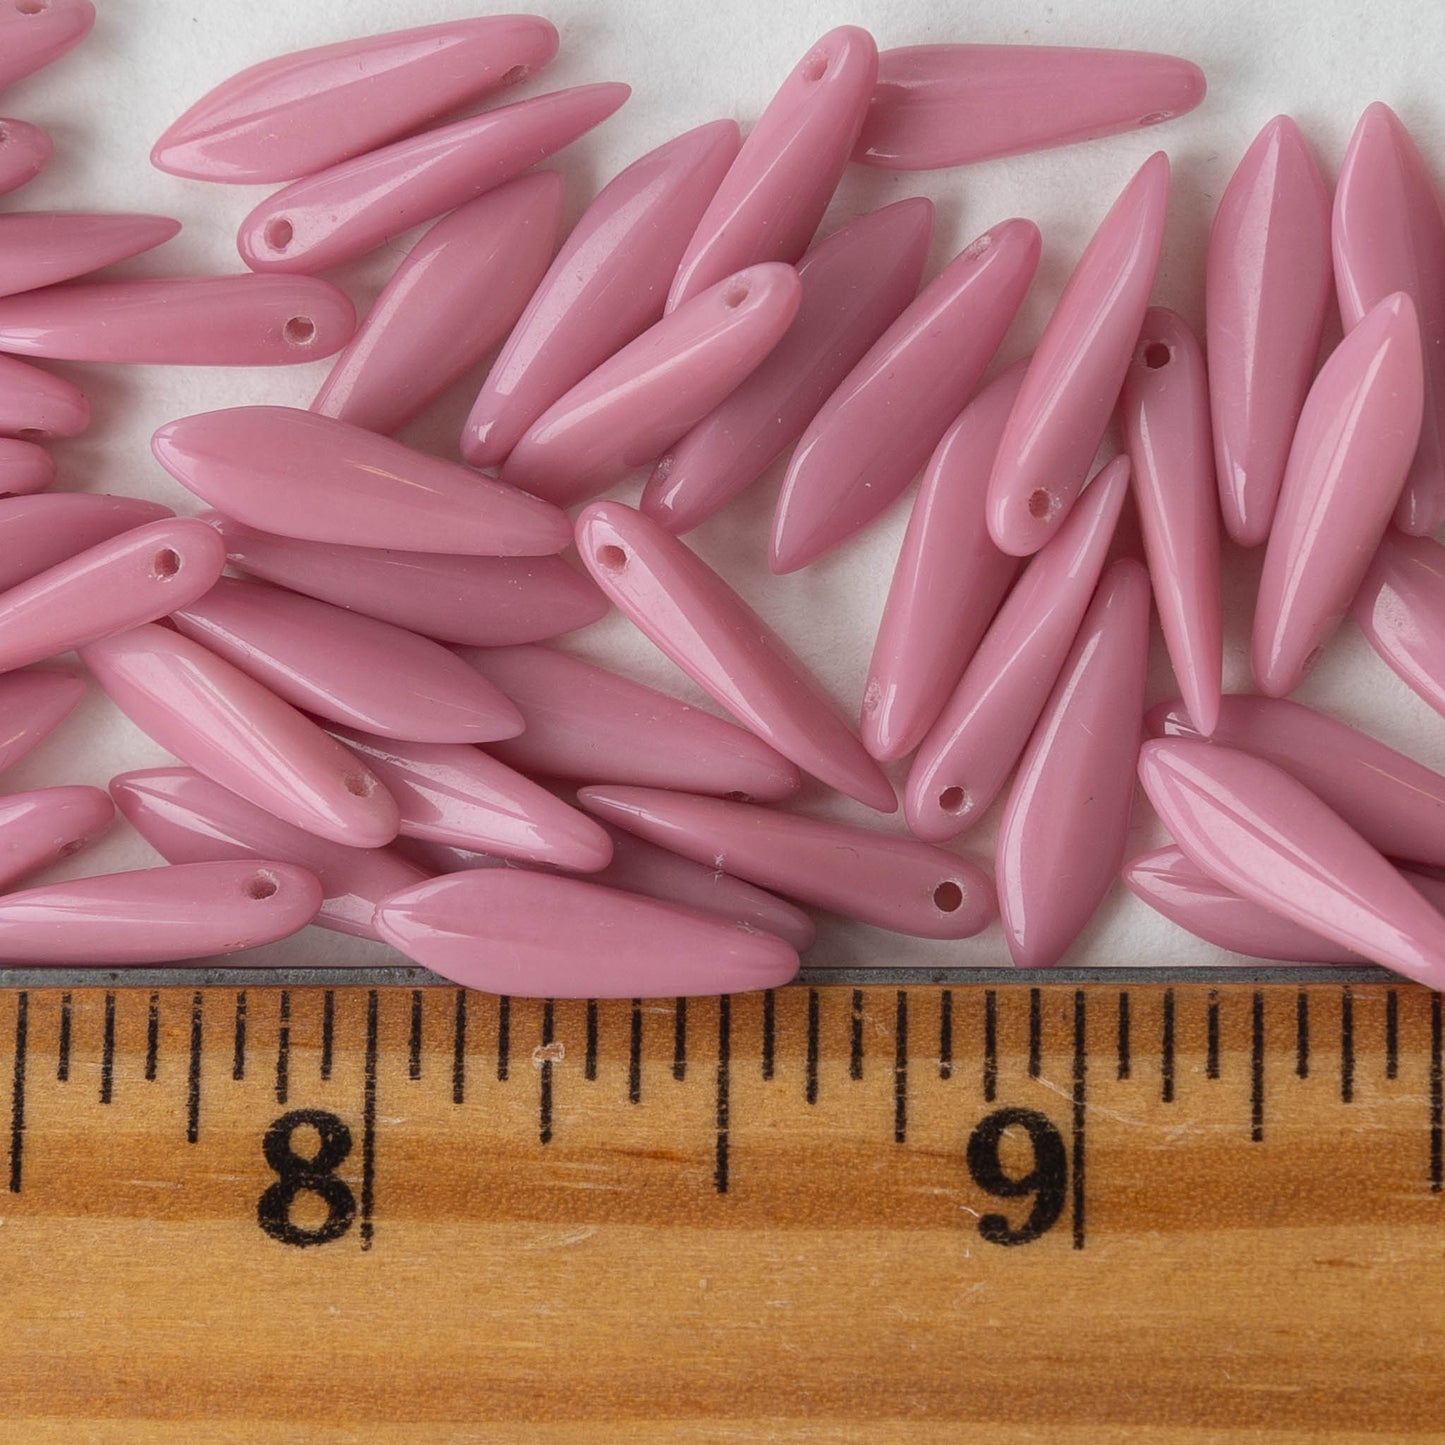 Copy of 16mm Dagger Beads - Opaque pink - 50 beads